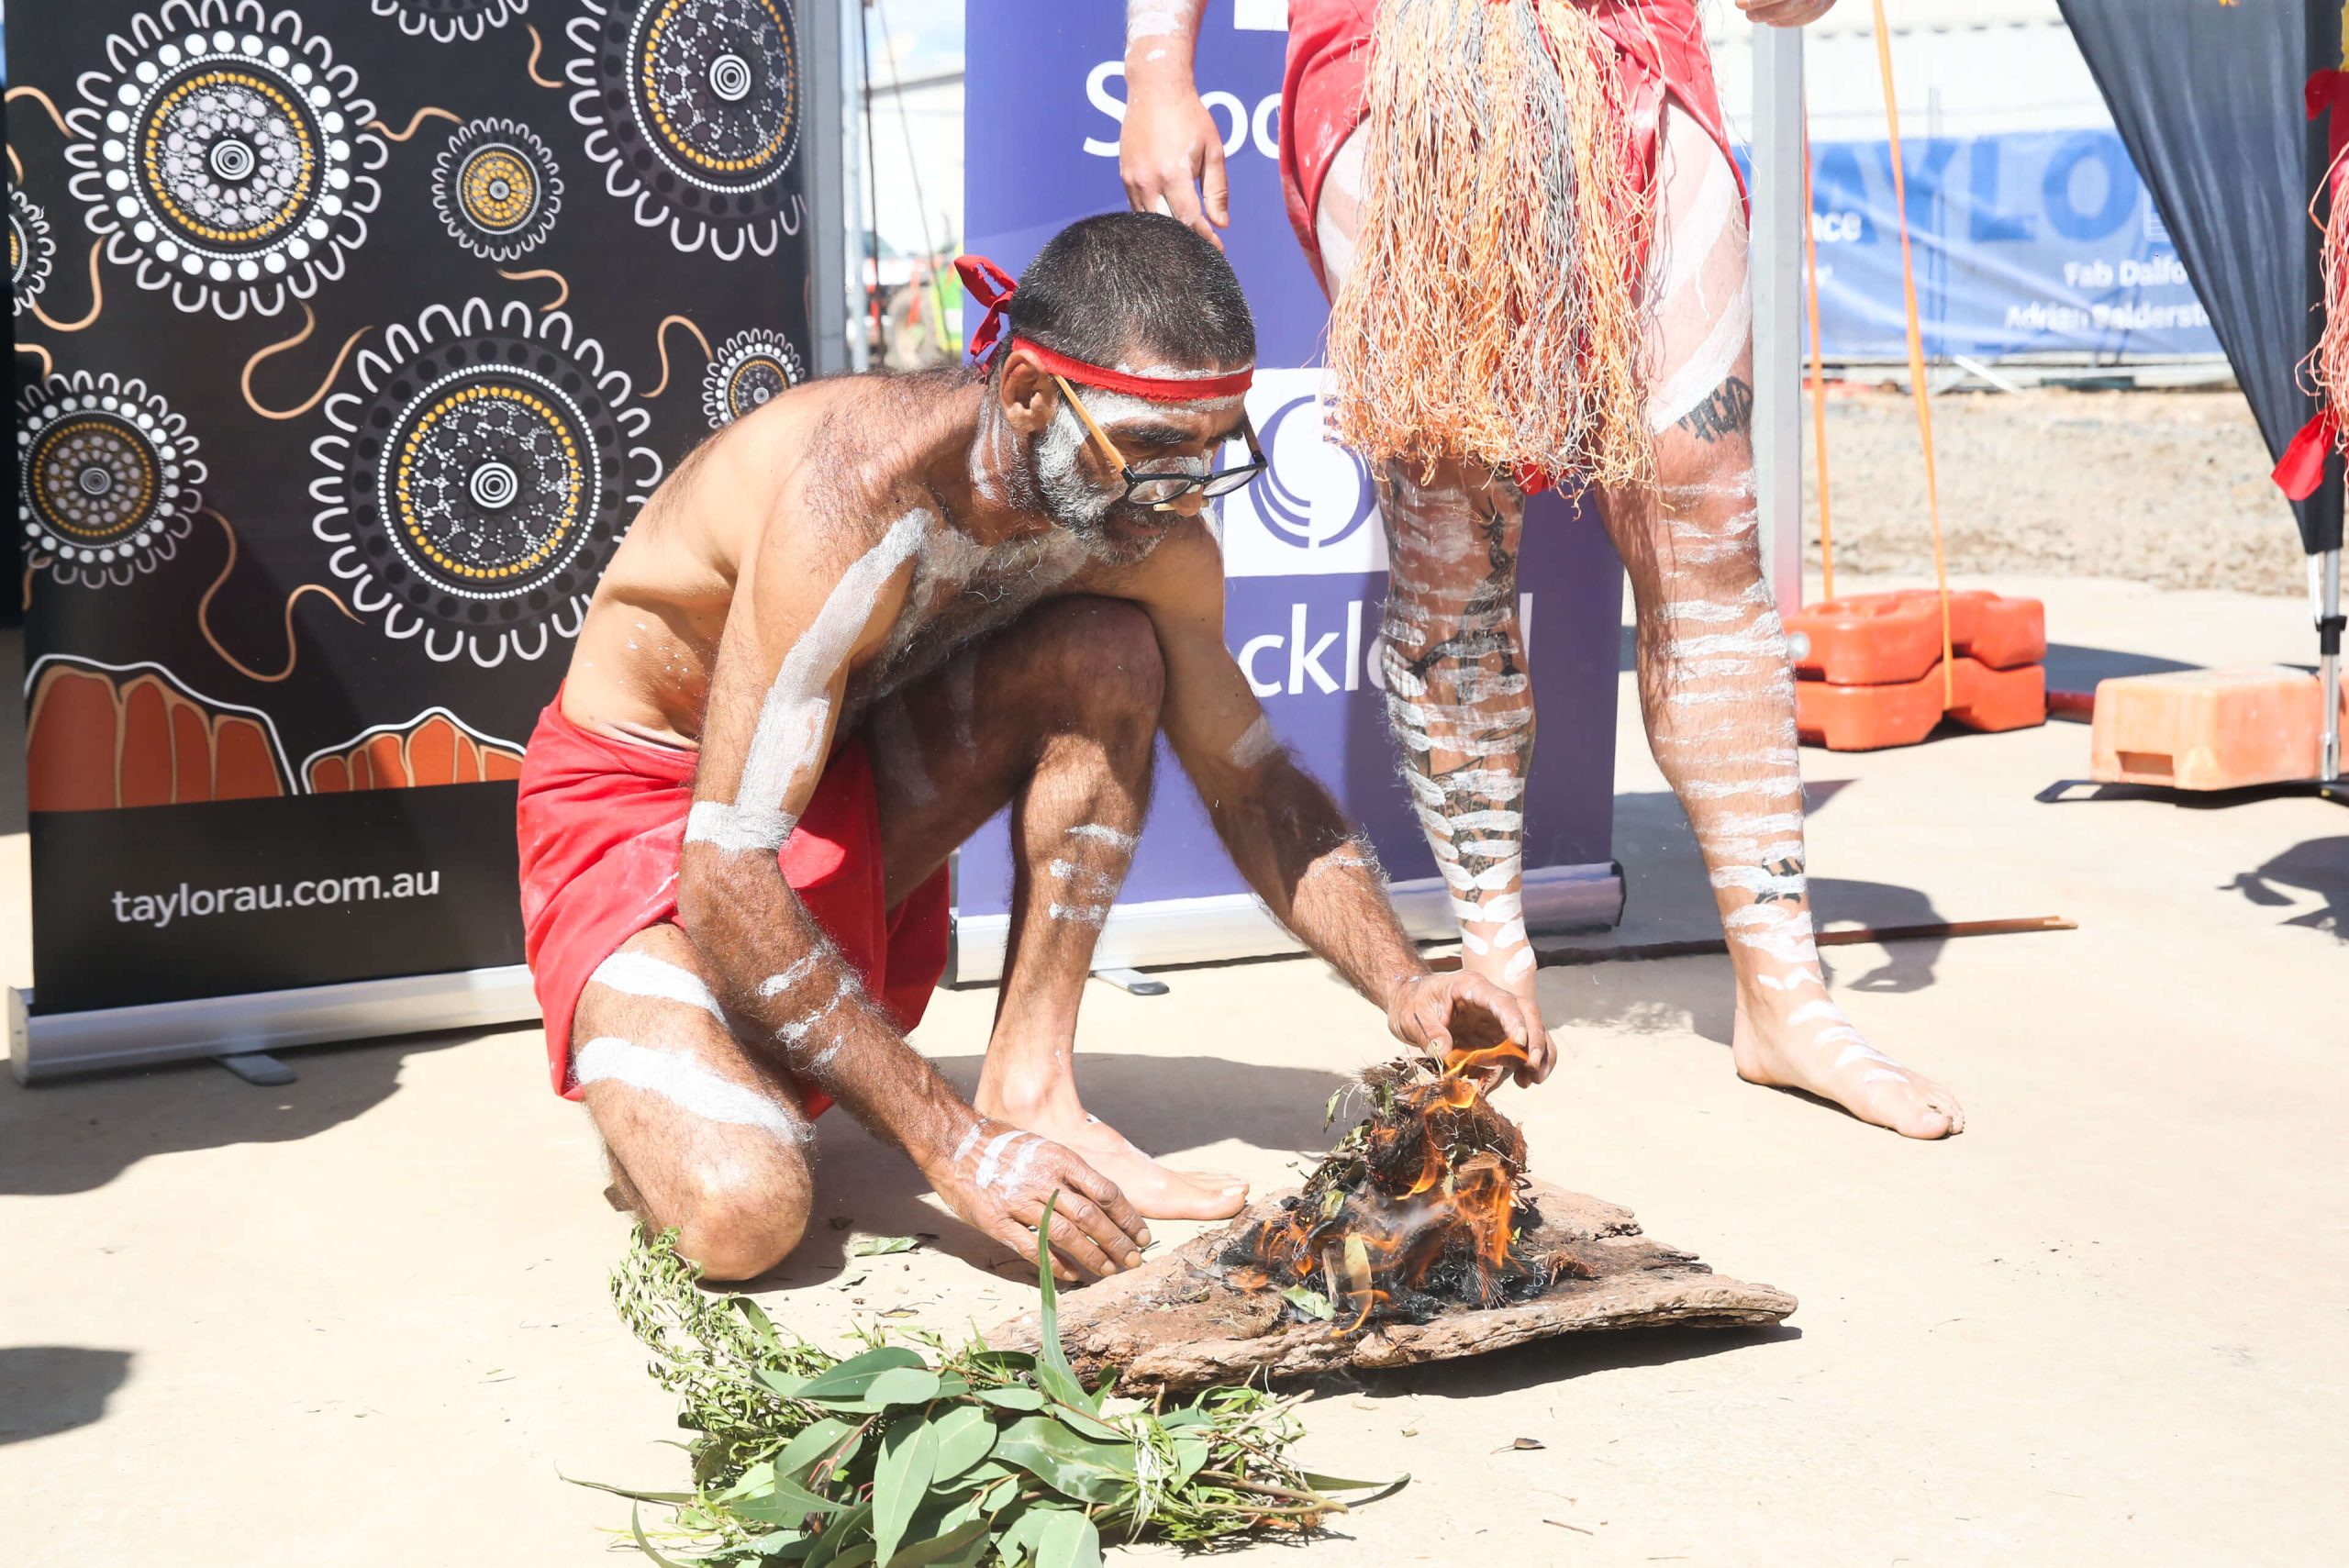 06 leslie mcleod tending stockland smoking ceremony taylor industrial